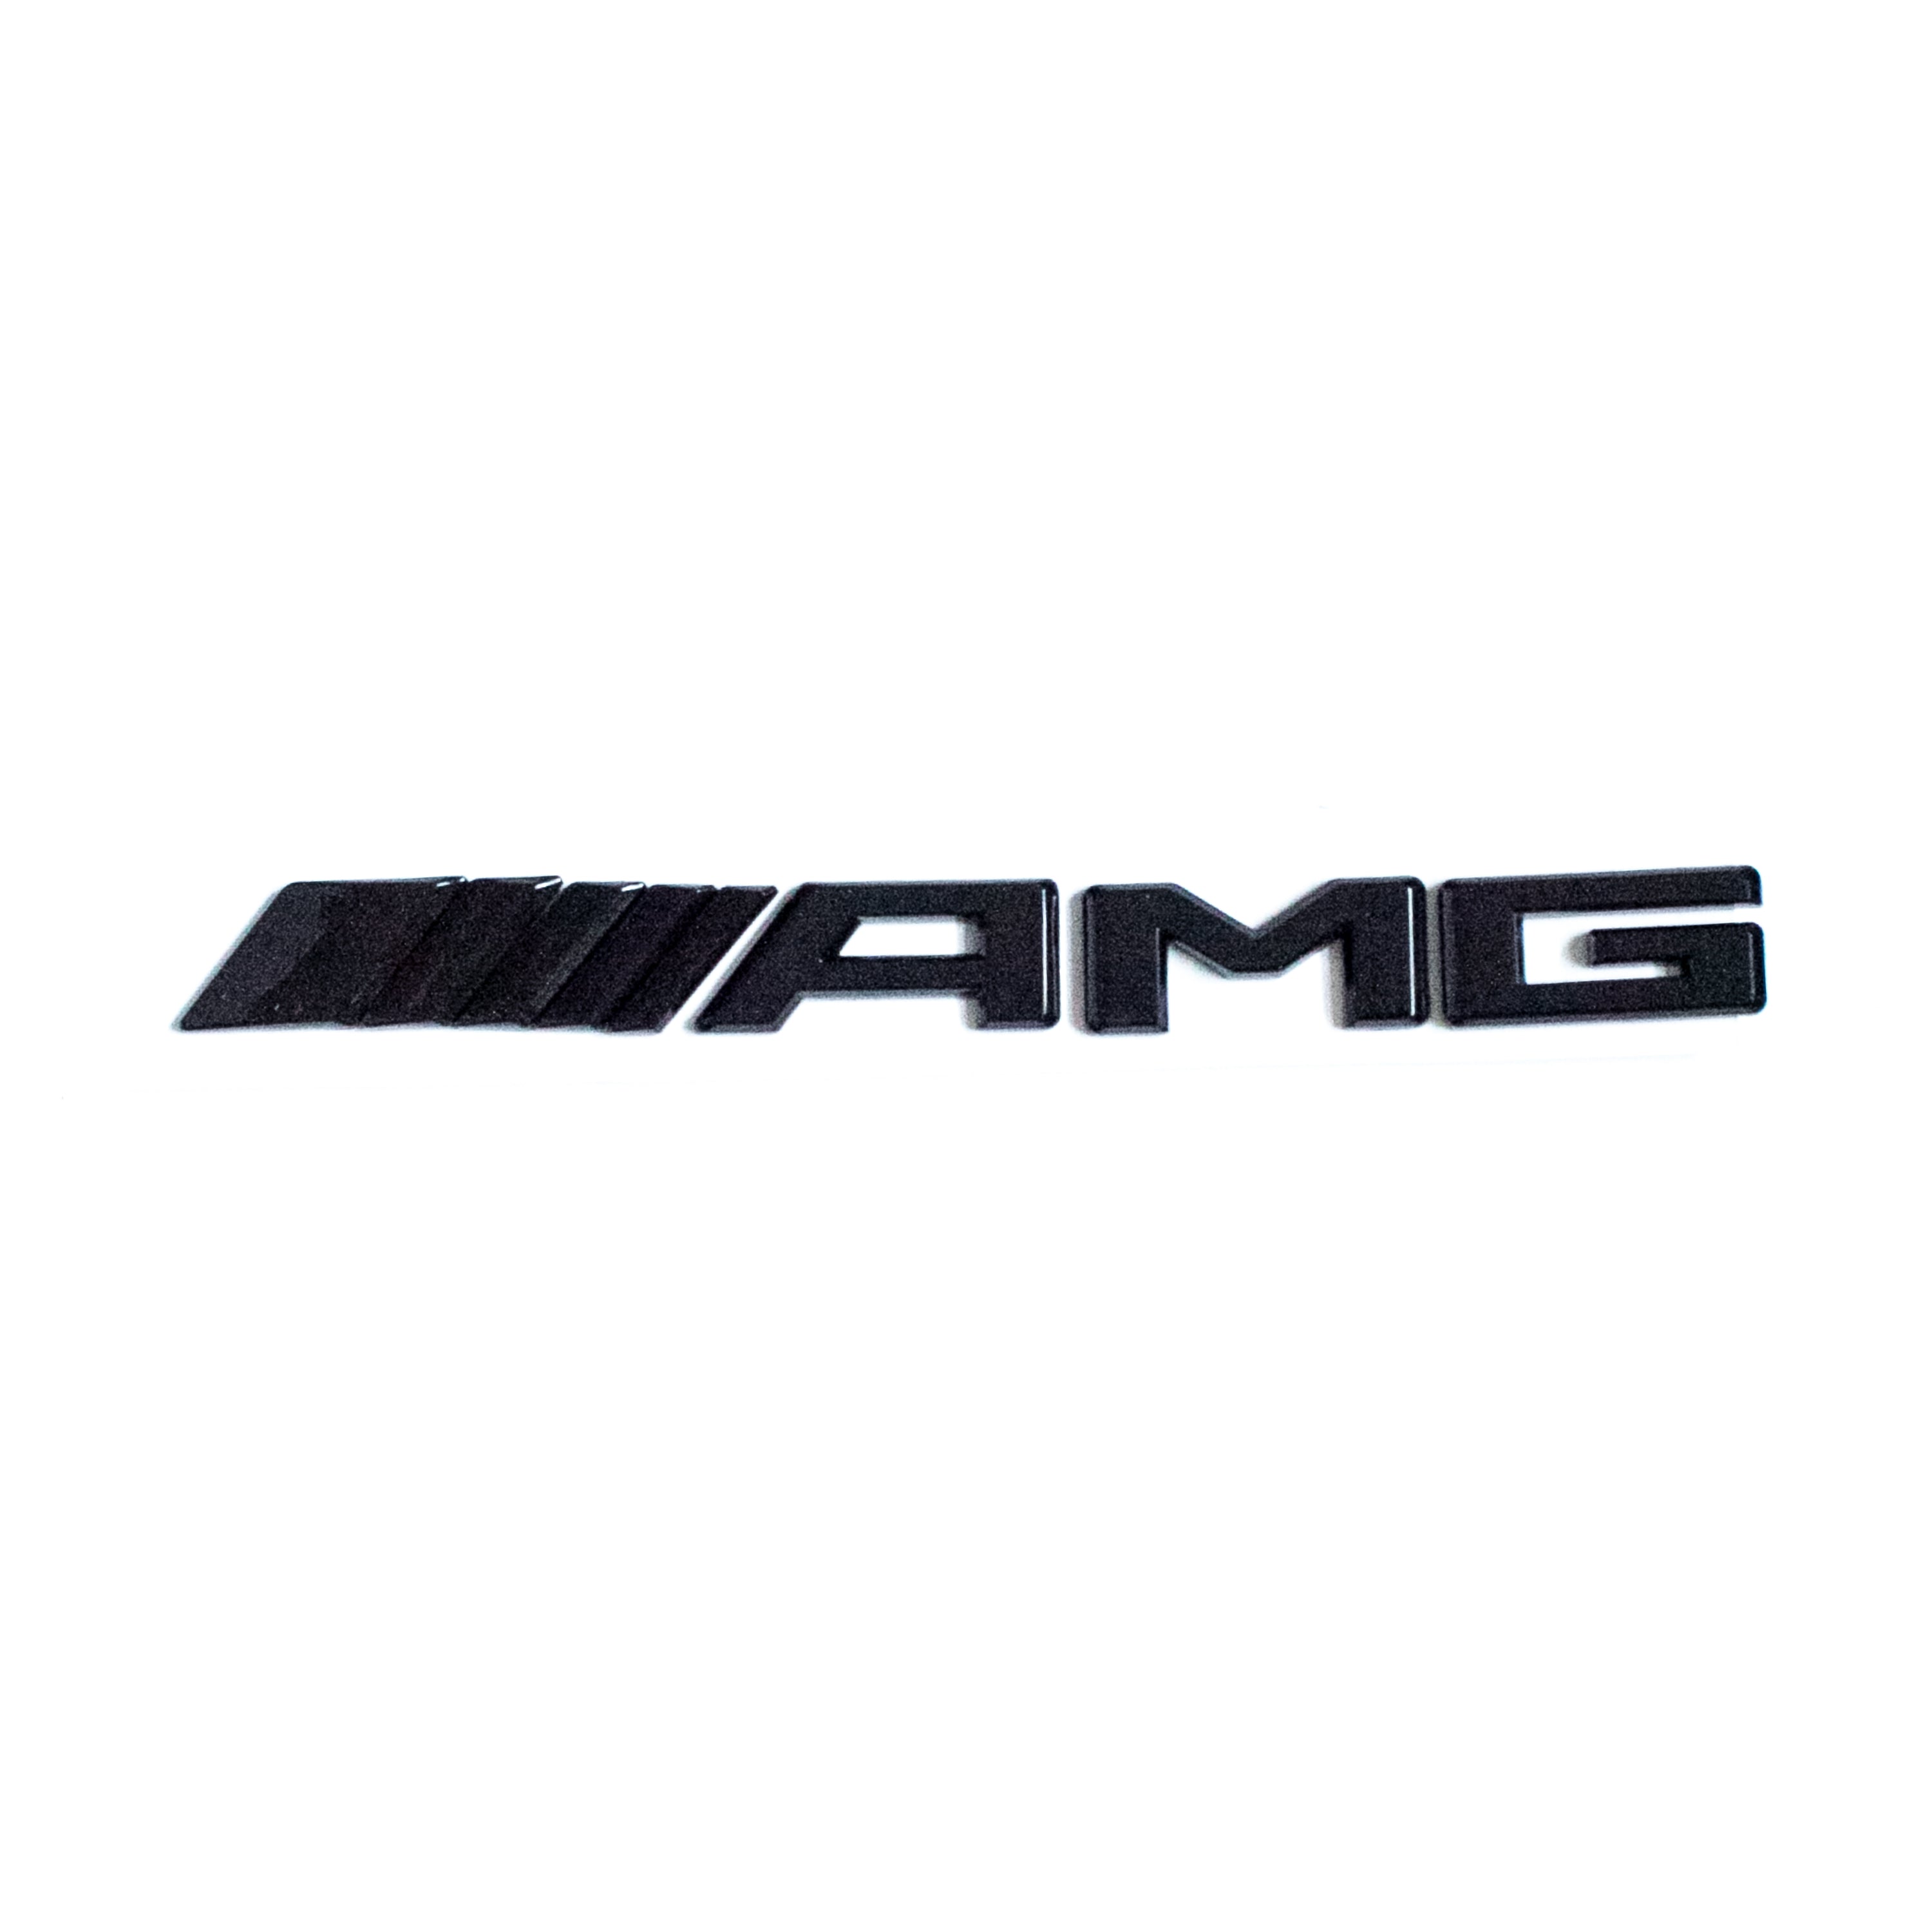 Buy Incognito-7 3D Laxury Mercedes Benz Club Logo Mercedes Benz AMG Club Logo  Badge Mercedes Benz Logo AMG Logo Mercedes Benz Badge AMG Badge for All  Mercedes Benz Cars (Silver) Online at